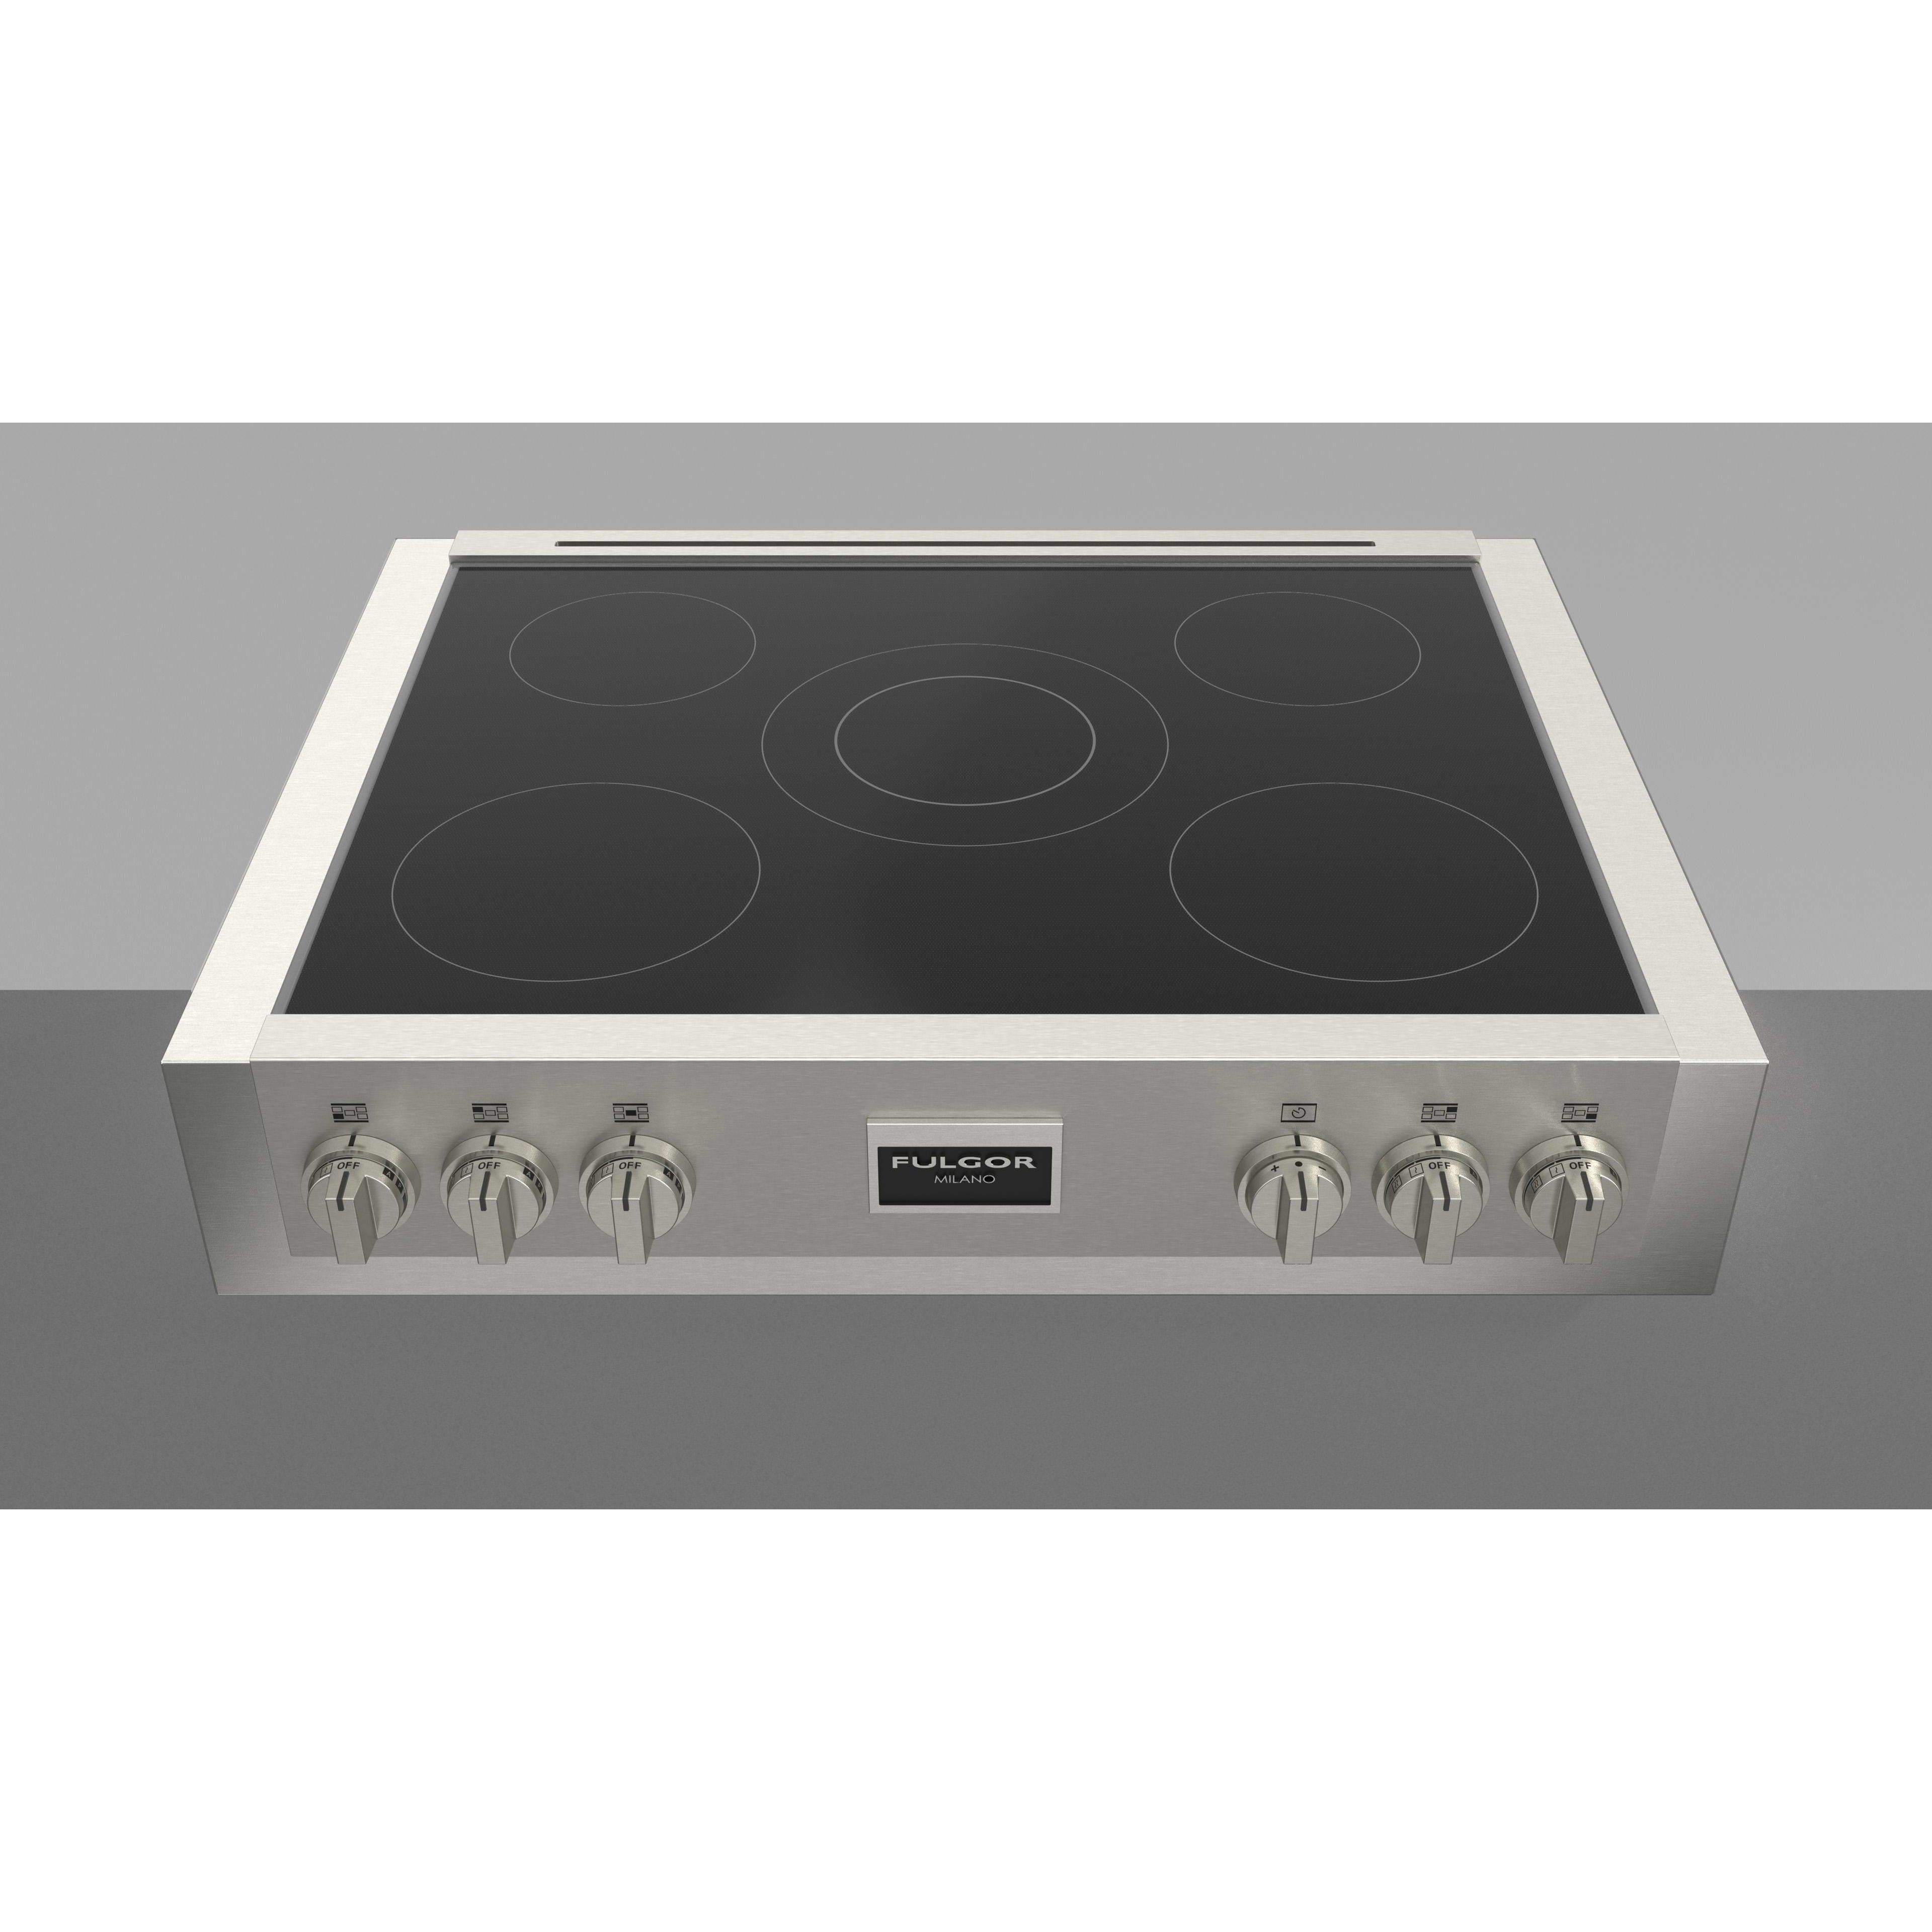 Fulgor Milano 36" Induction Rangetop with 5 Cooking Zones, Stainless Steel - F6IRT365S1 Rangetop F6IRT365S1 Luxury Appliances Direct